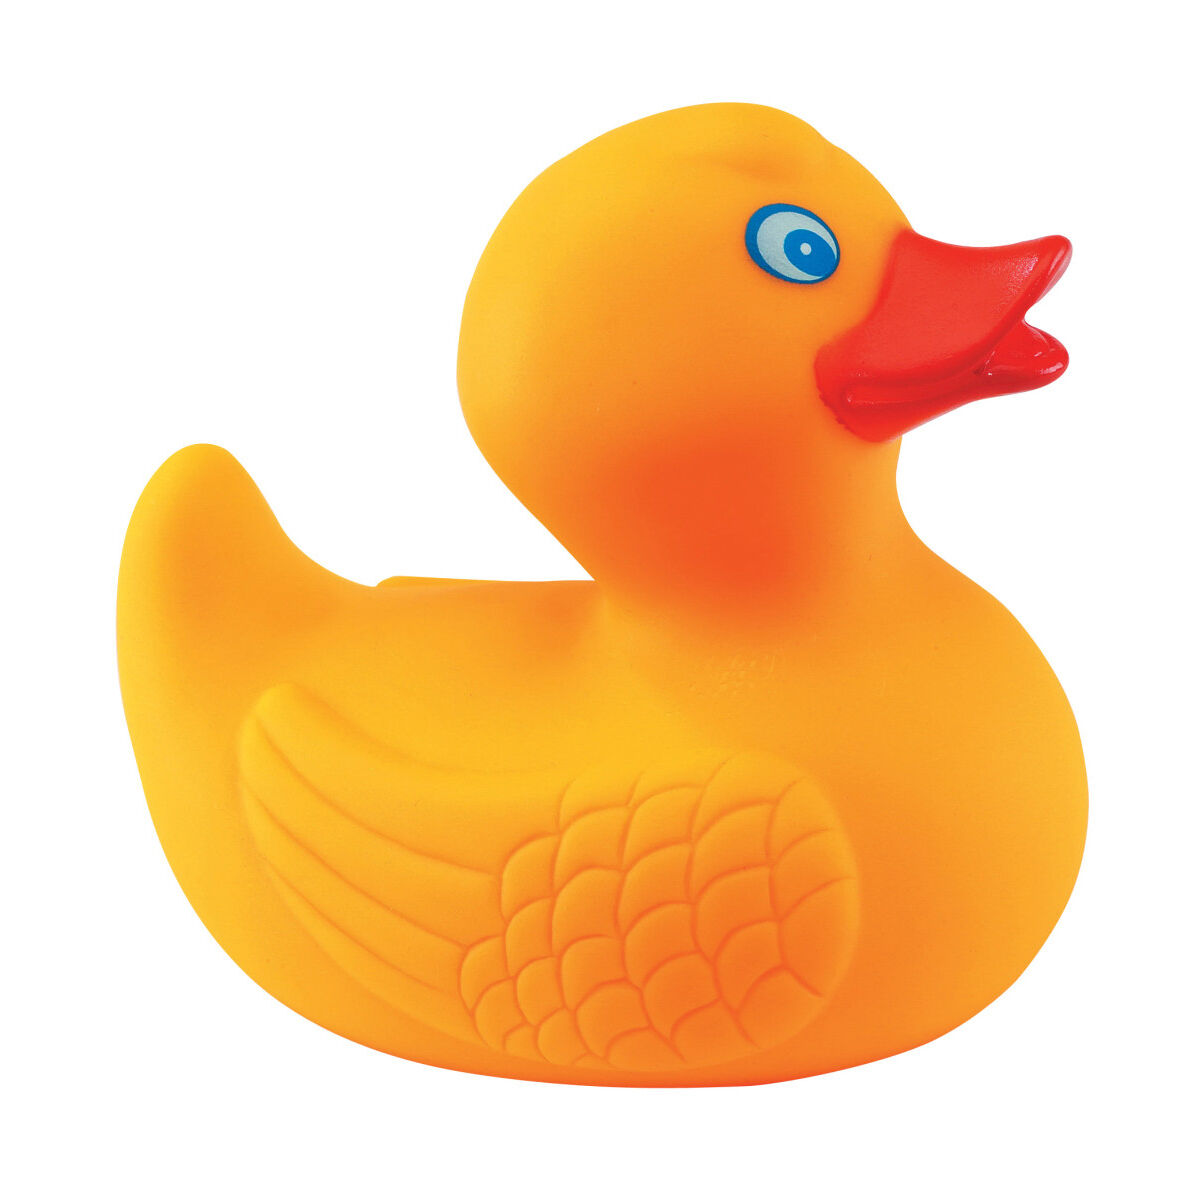 Promotional Printed Rubber Ducks